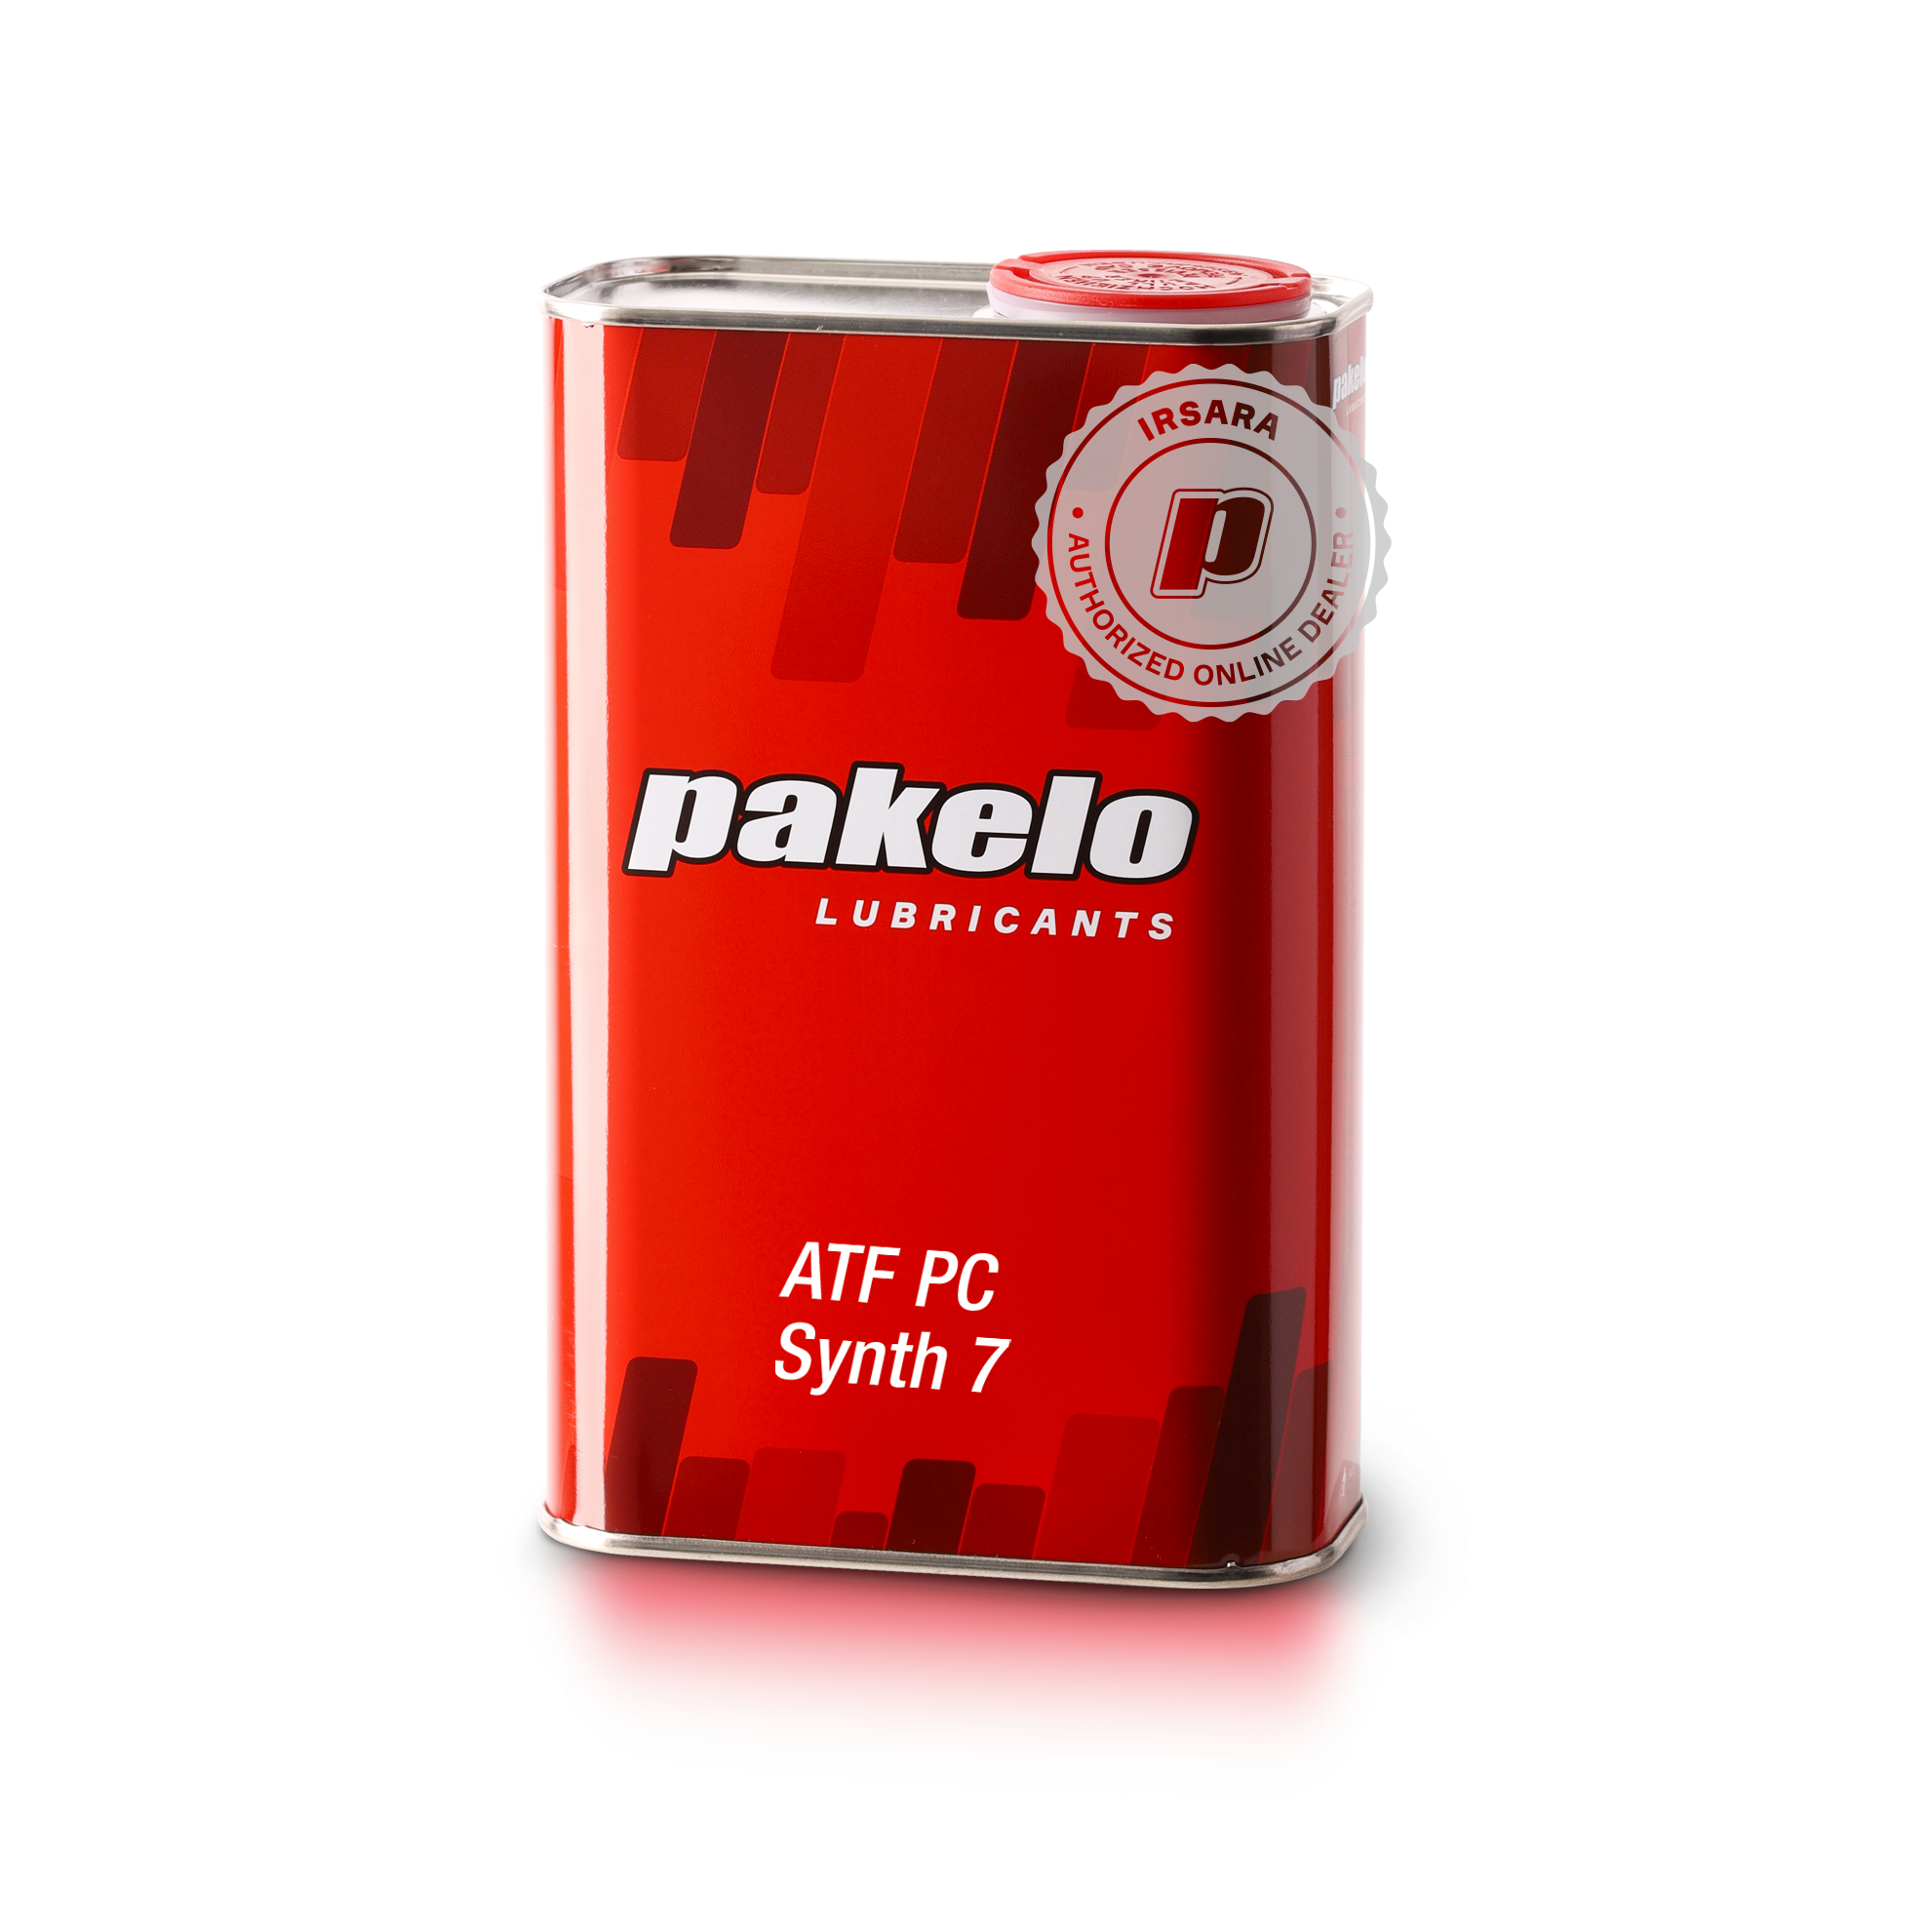 Pakelo Atf Pc Synth 7 (1 Lt)